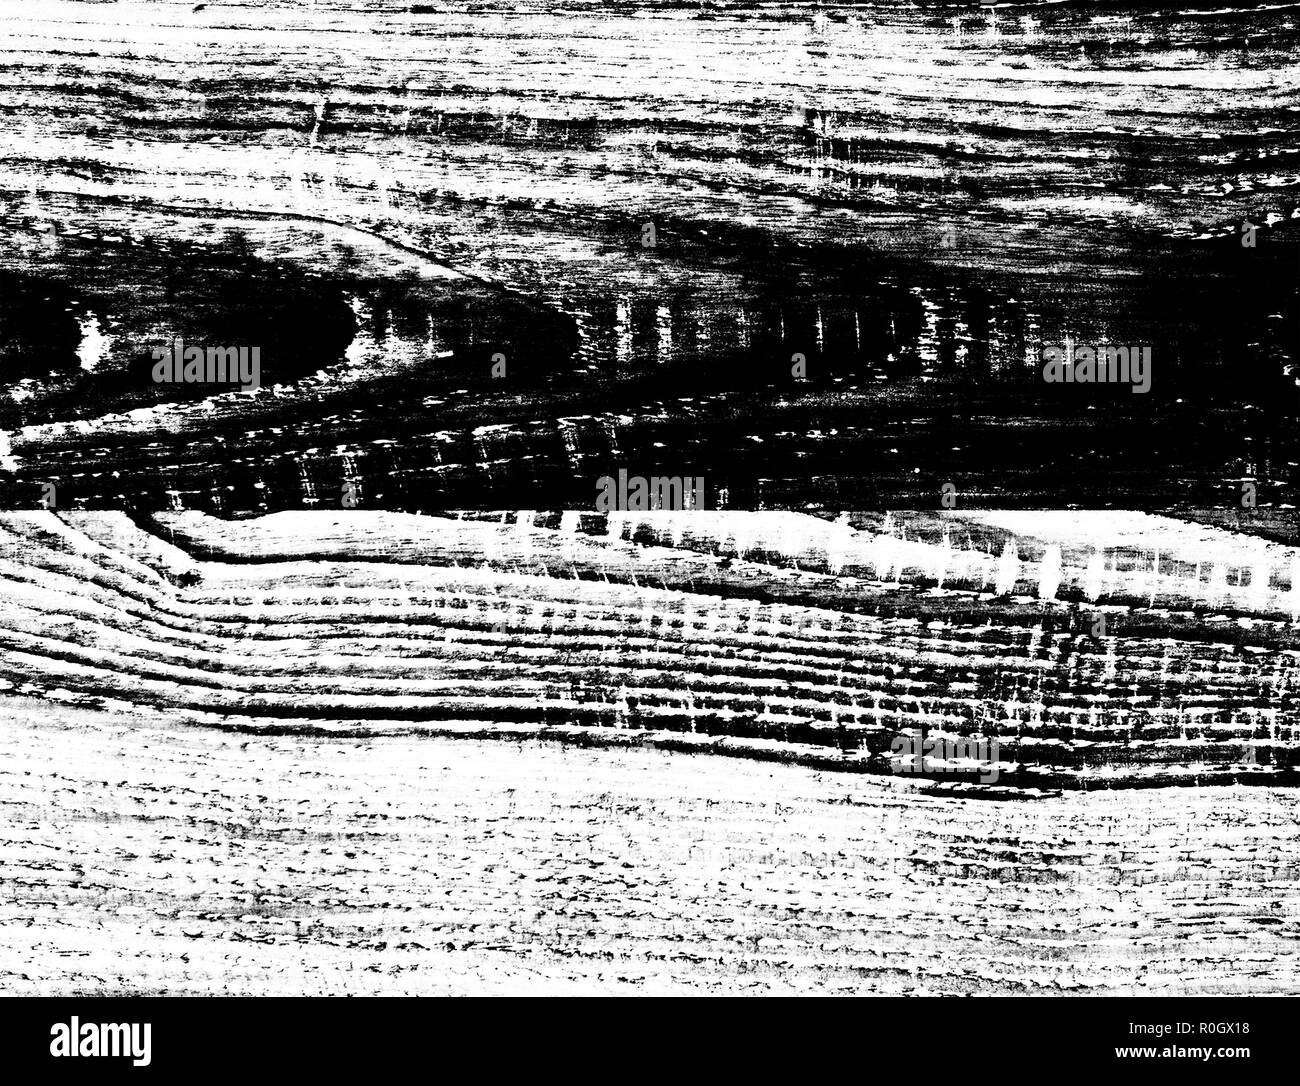 Black and white high contrast wooden texture, lengthwise cut with vertical scratches Stock Photo